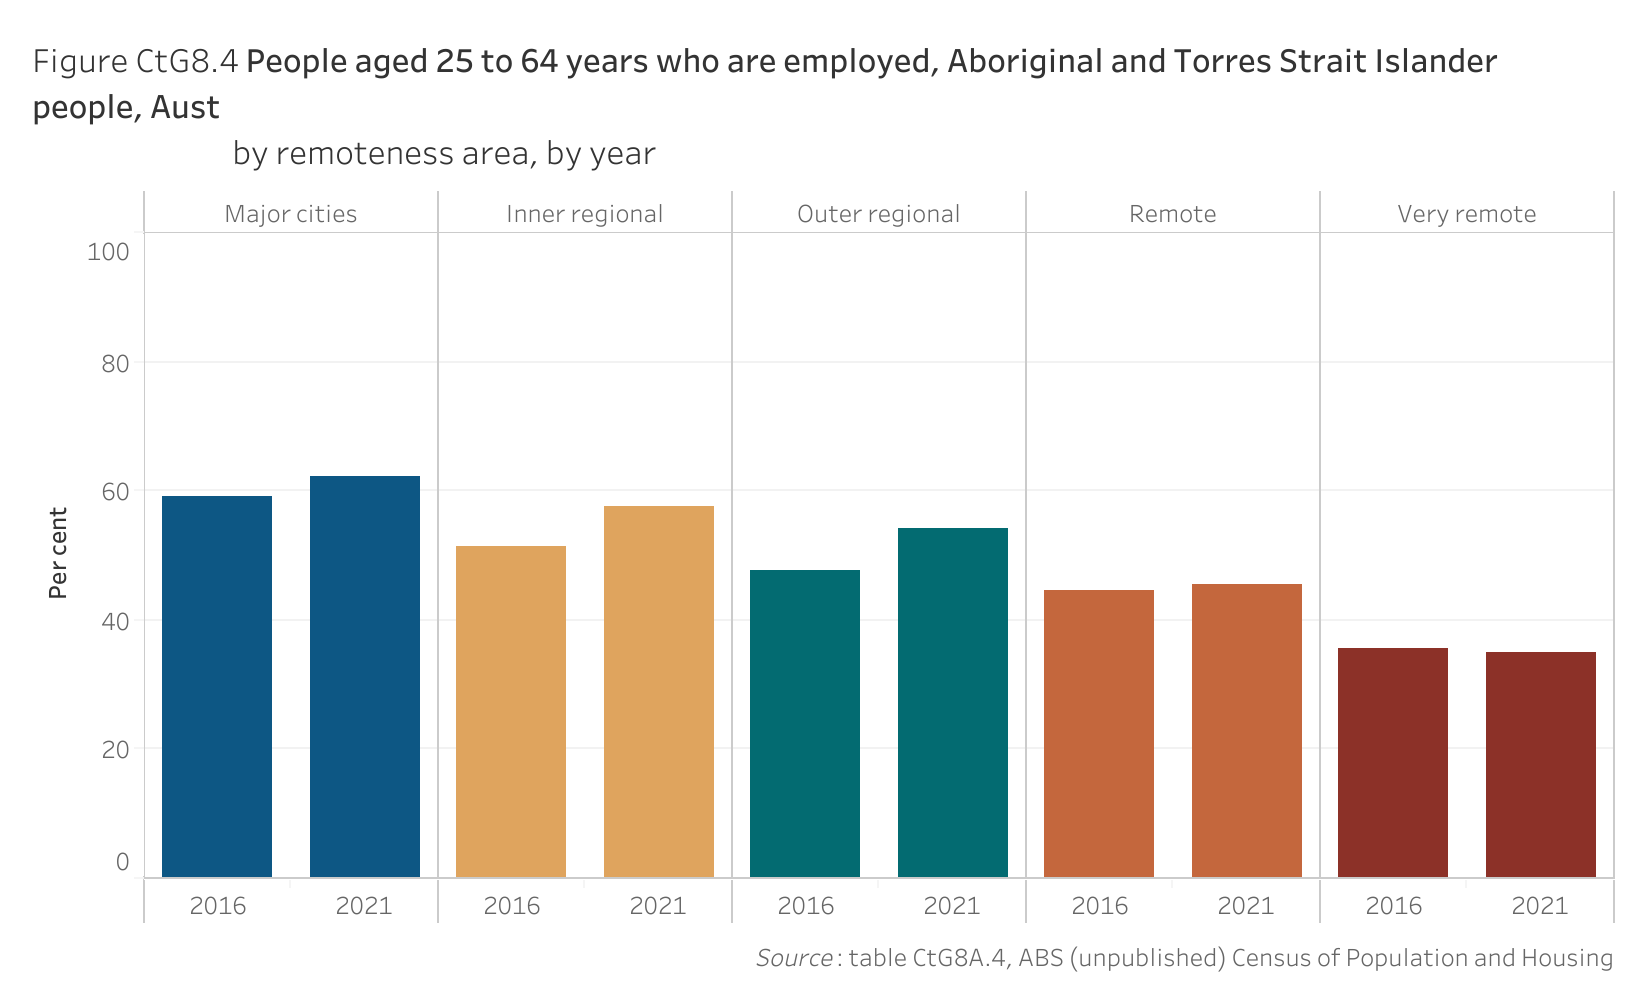 Figure CtG8.4 shows people aged 25 to 64 years who are employed, Aboriginal and Torres Strait Islander people, Australia, by remoteness area, by year. More details can be found within the text near this image.